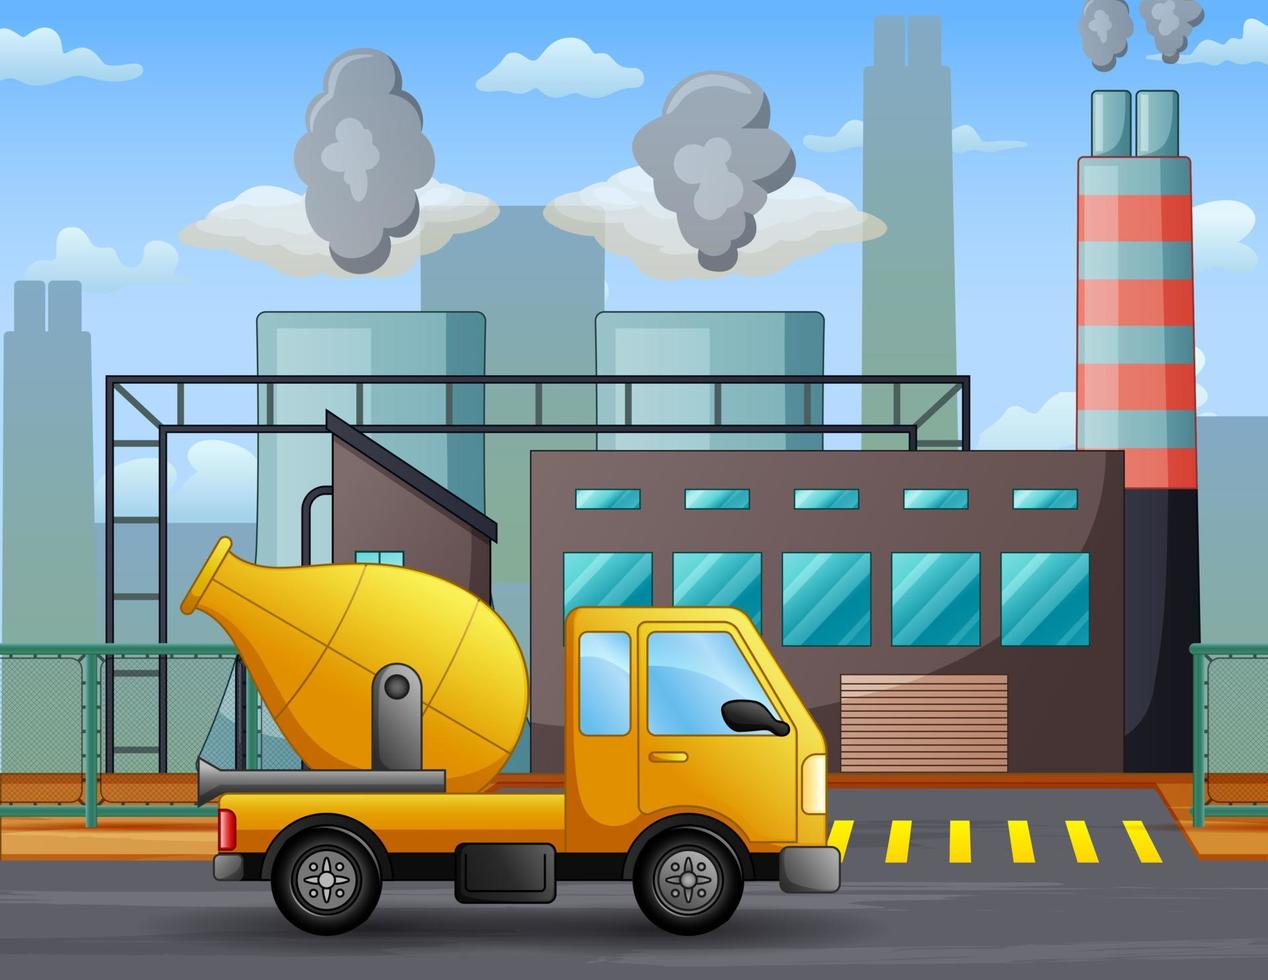 A mixer truck in front of the construction site illustration vector